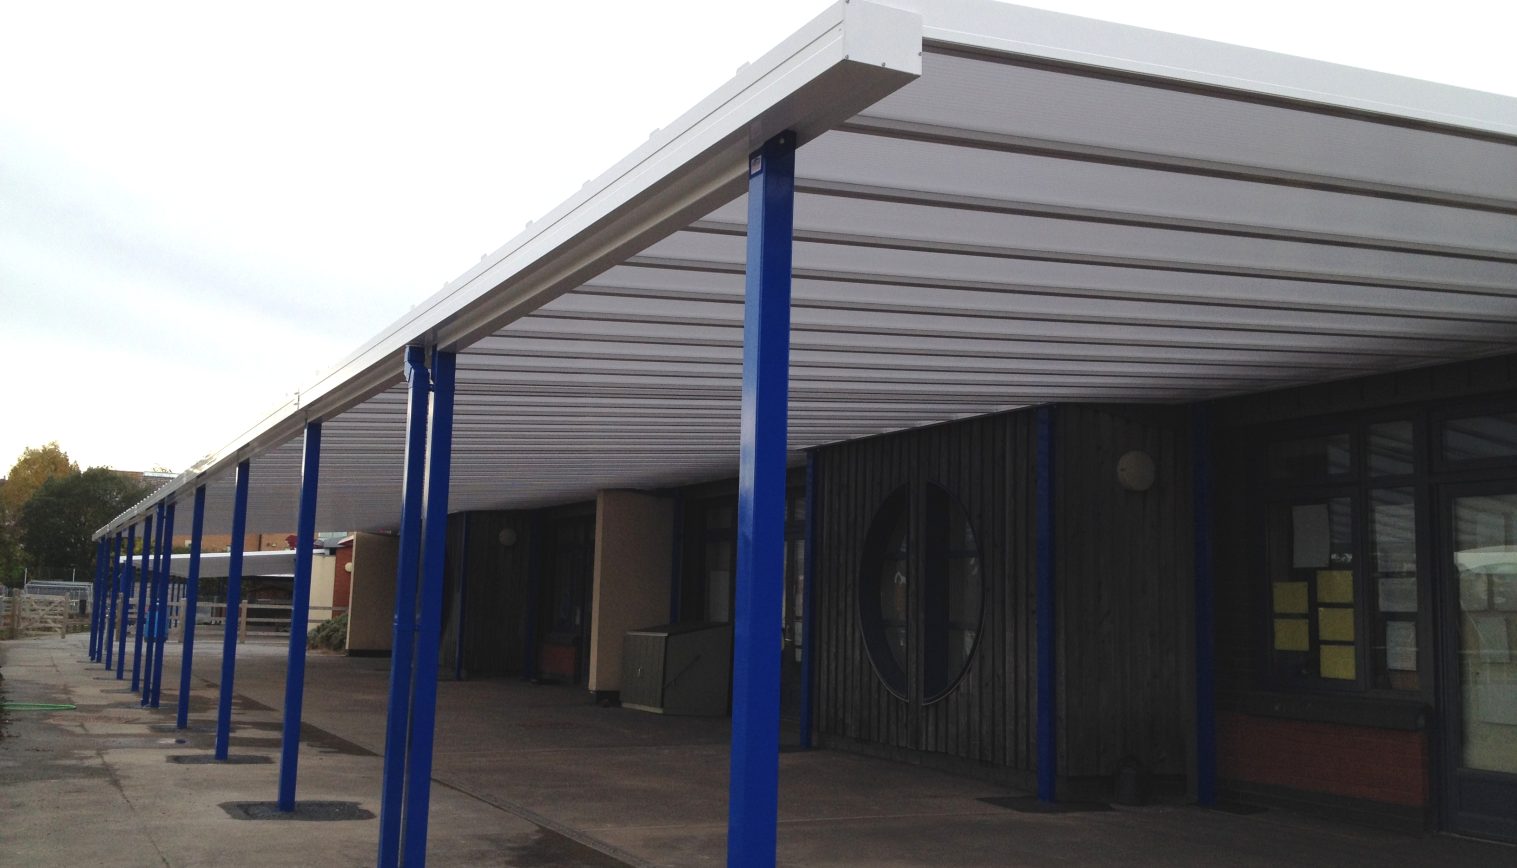 St Michael’s C of E Primary School – Wall Mounted Canopy